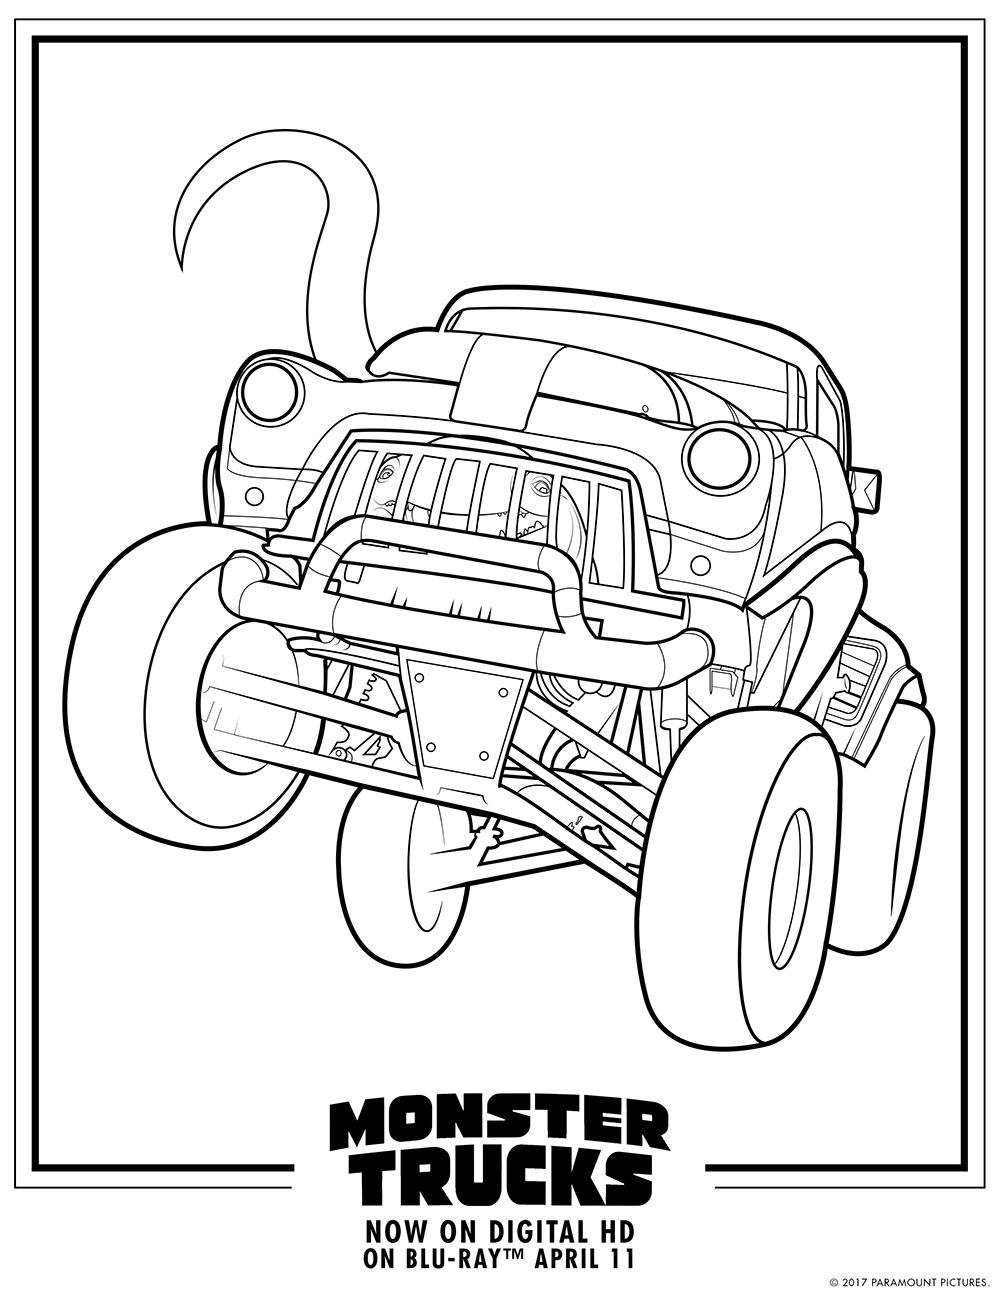 Monster Truck Coloring Pages / Monster Truck Crushing A Car Coloring